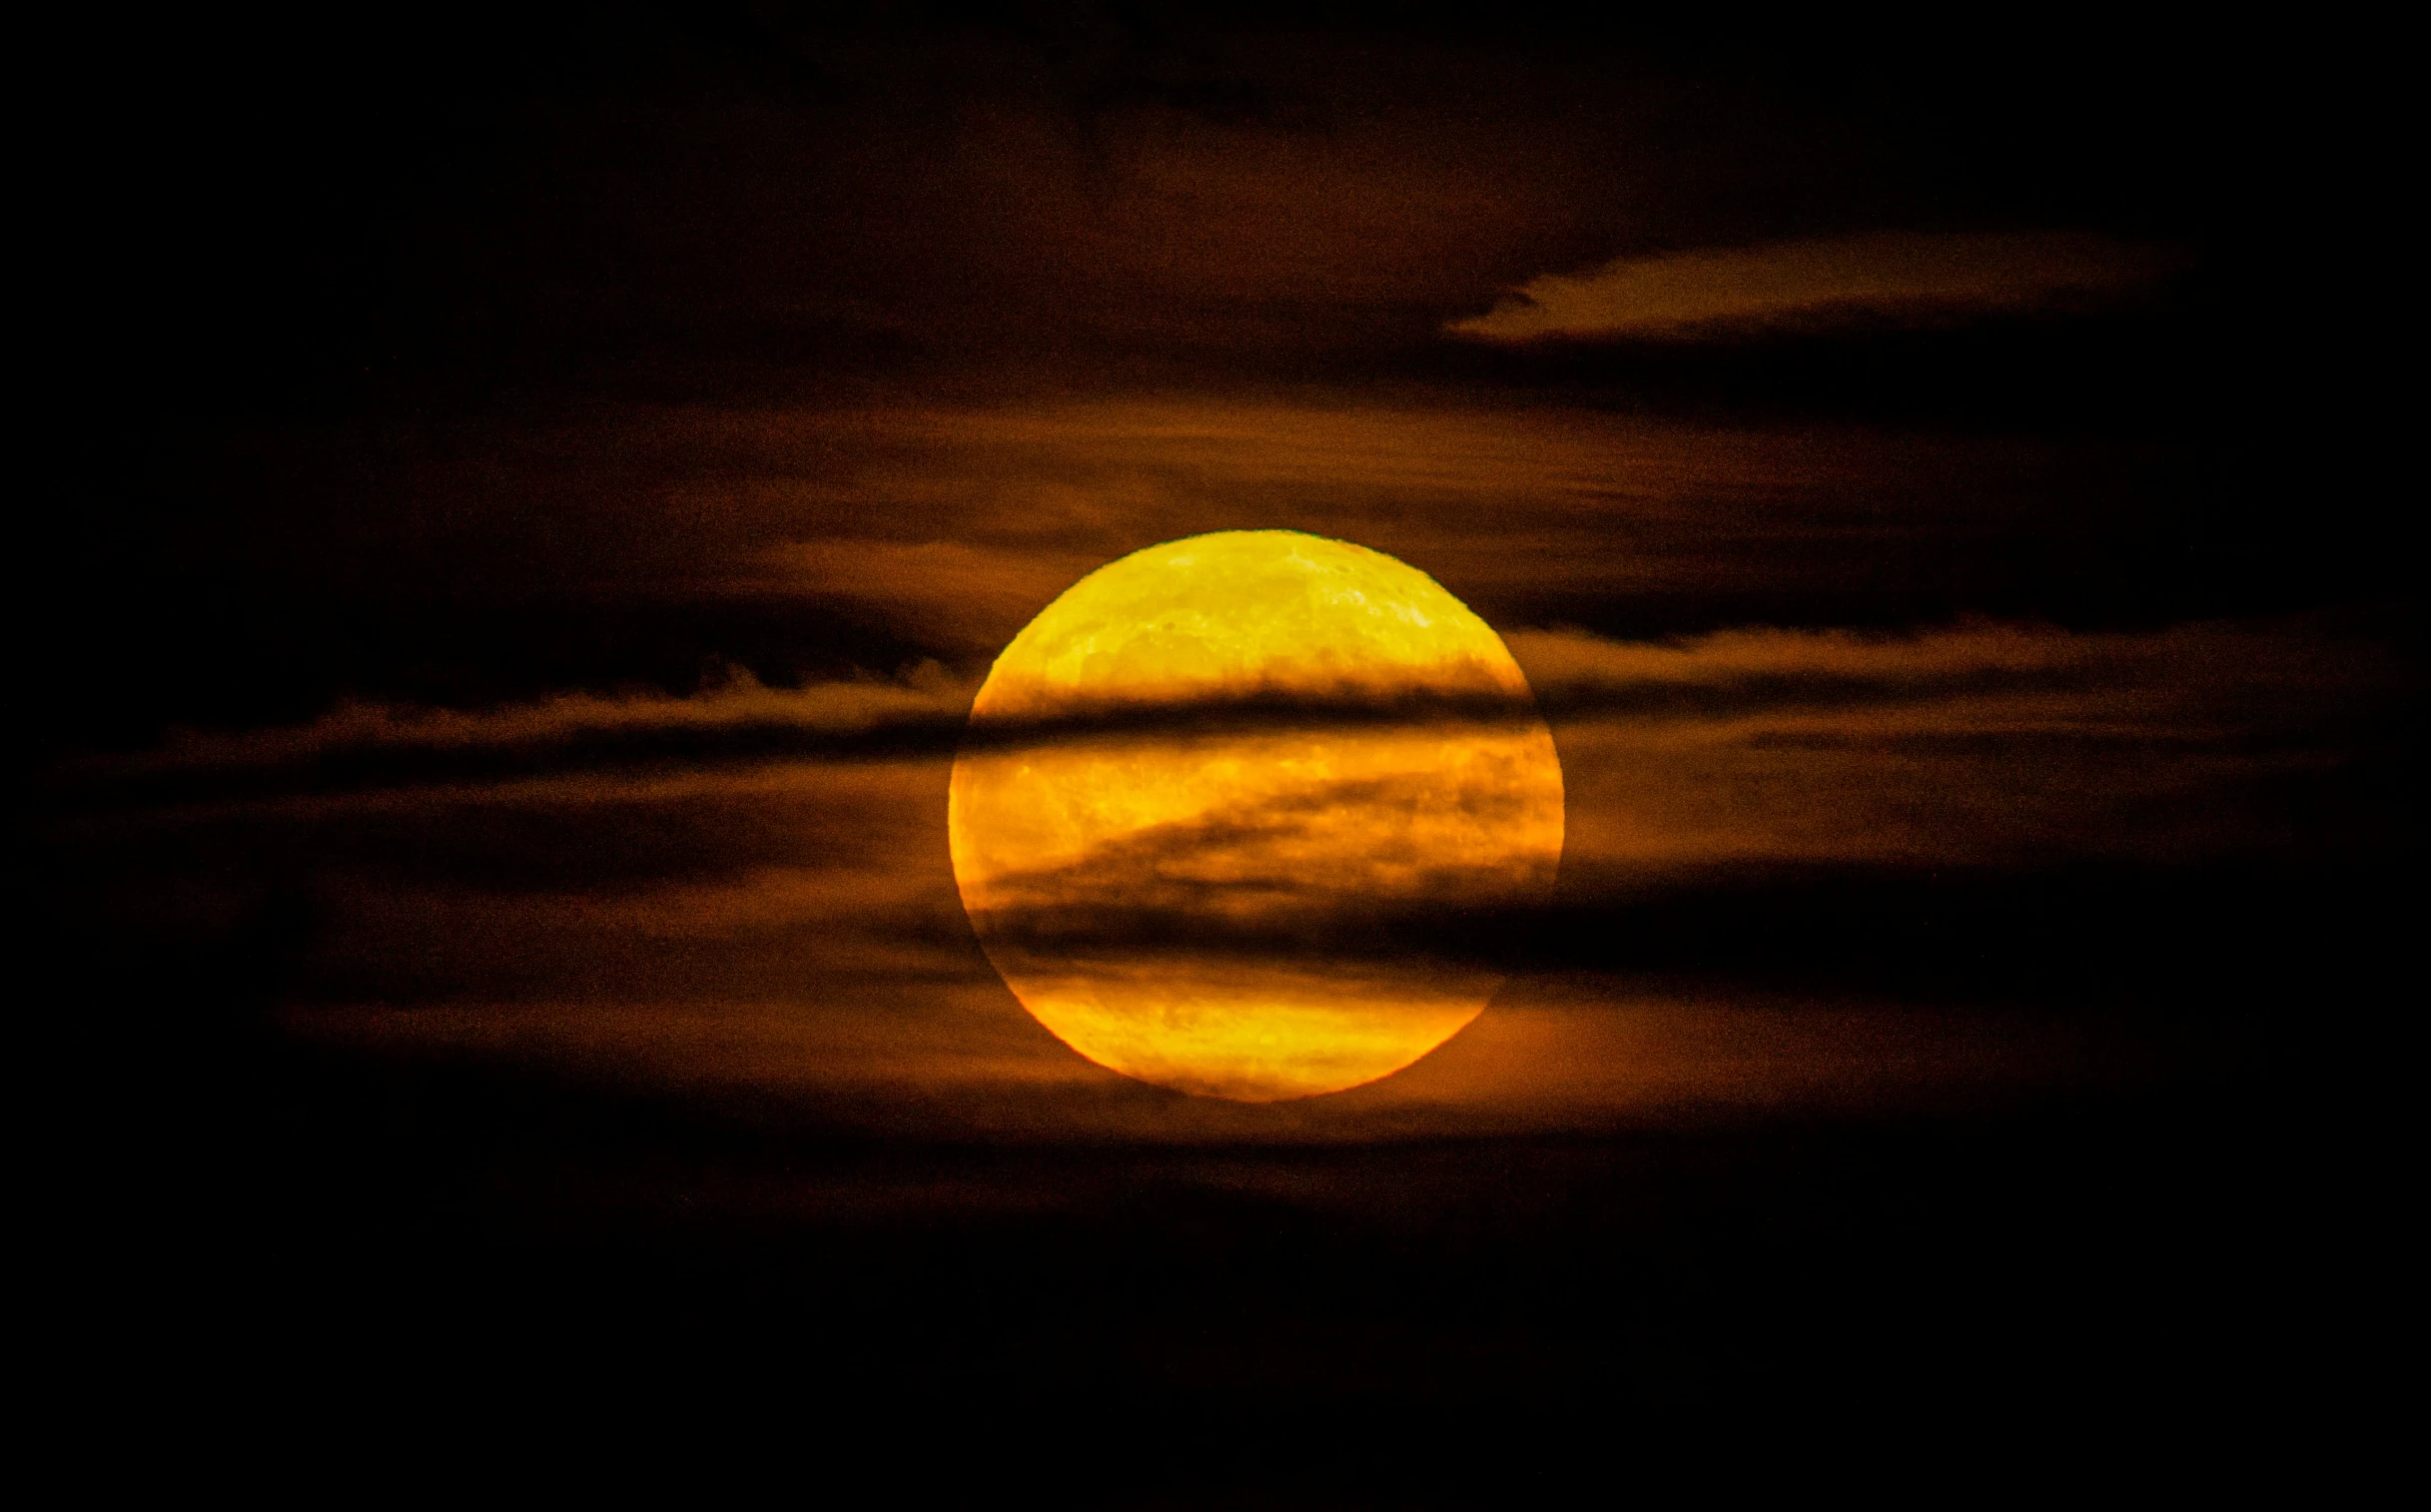 an image of a full moon seen through clouds